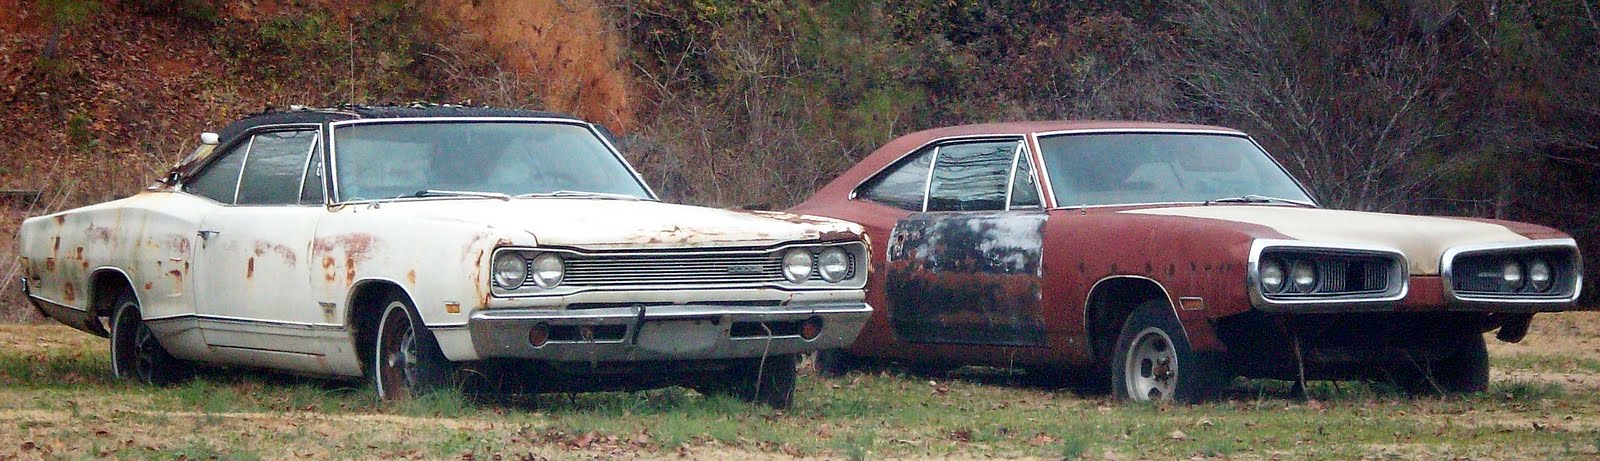 Muscle car alert I broke the law when I spotted this pair of Dodge Coronets